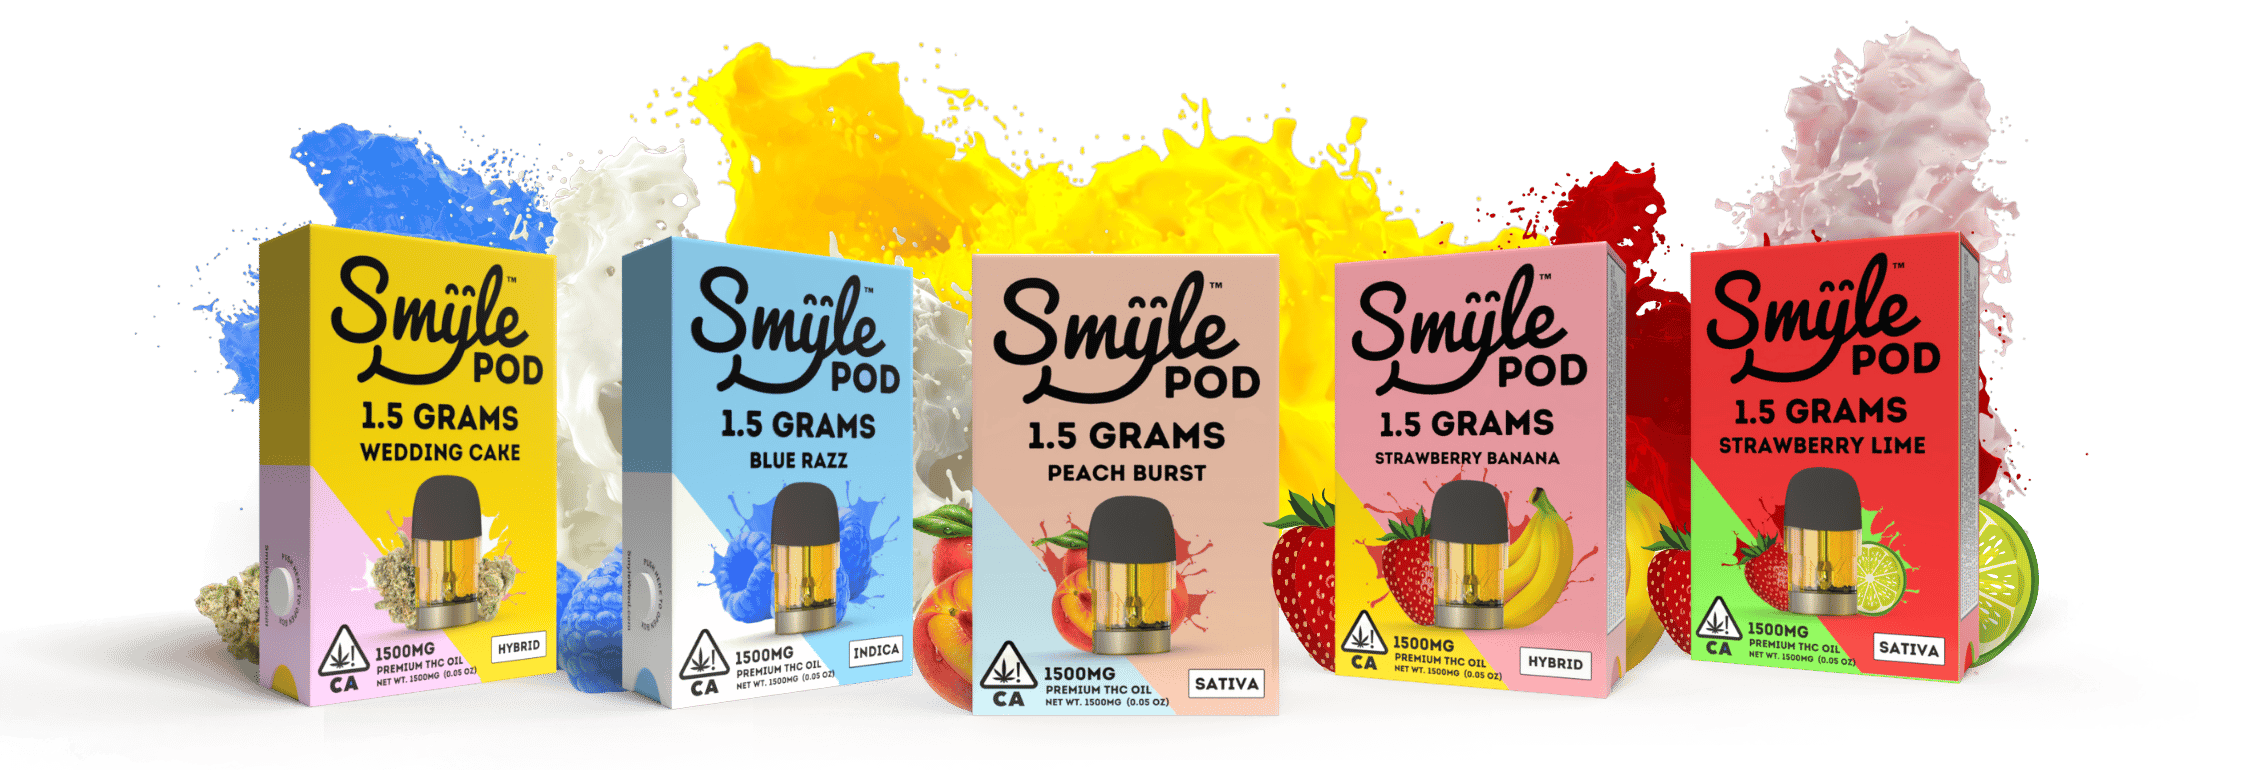 Smyle Weed Banner Product